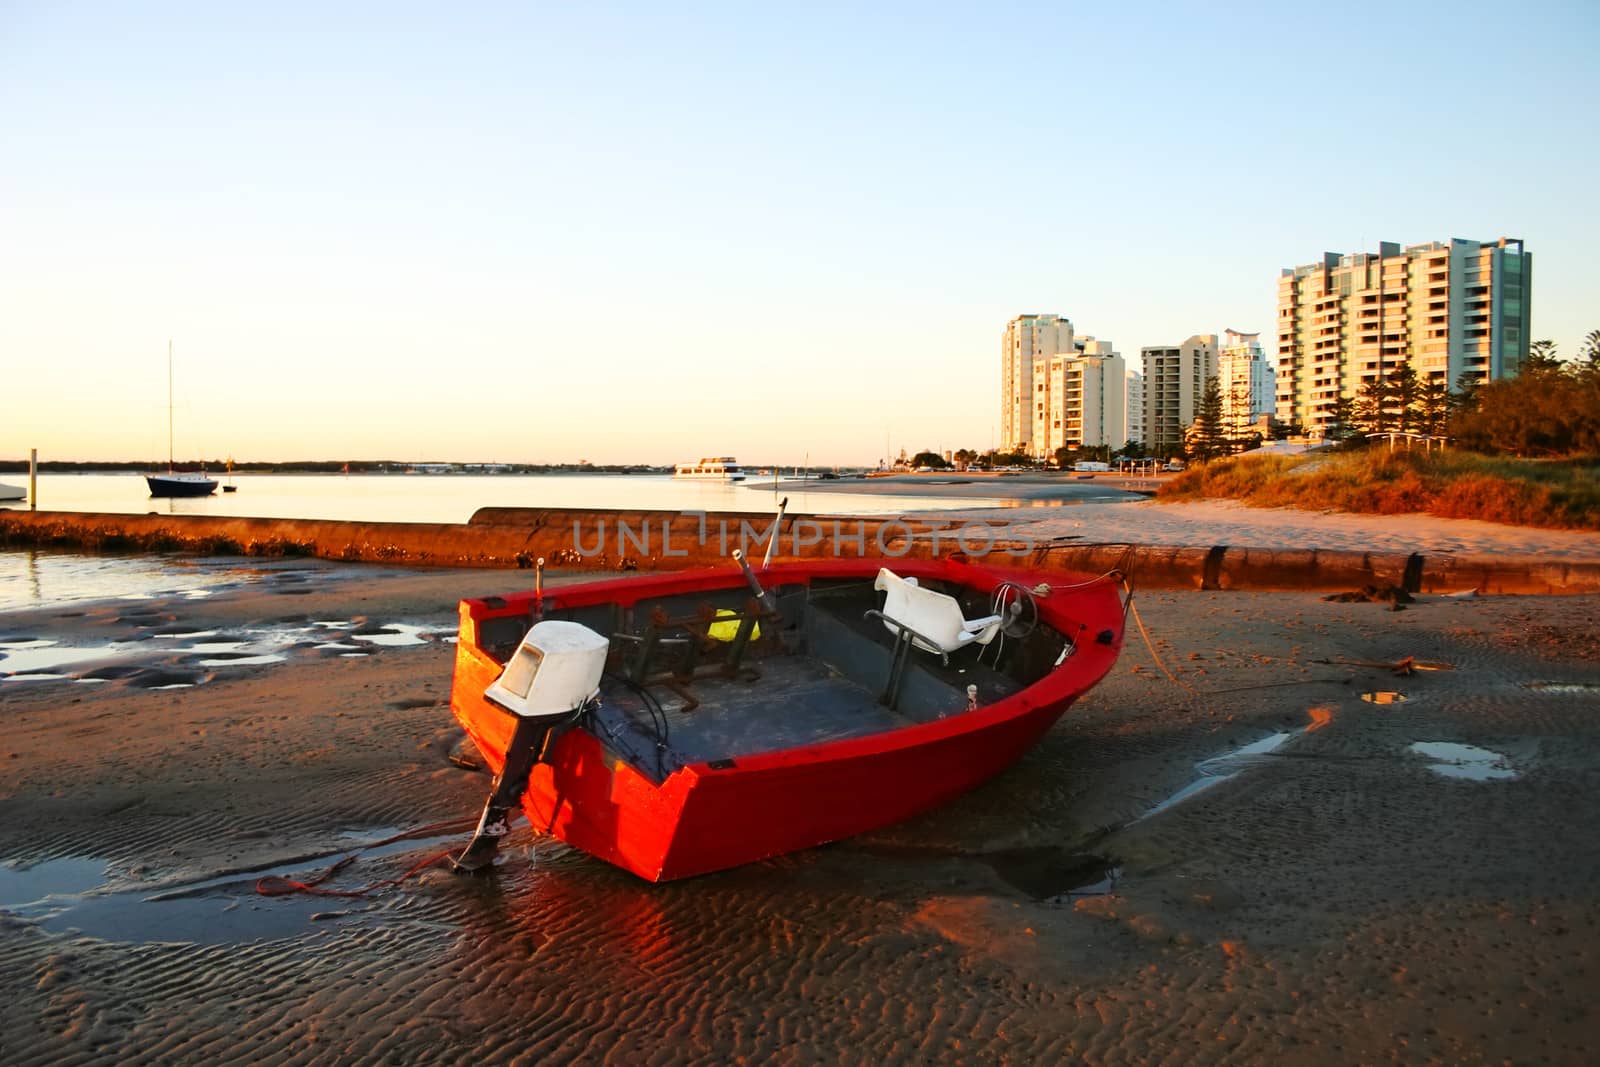 Battered old red dinghy with outboard motor lies on the beach at dawn.